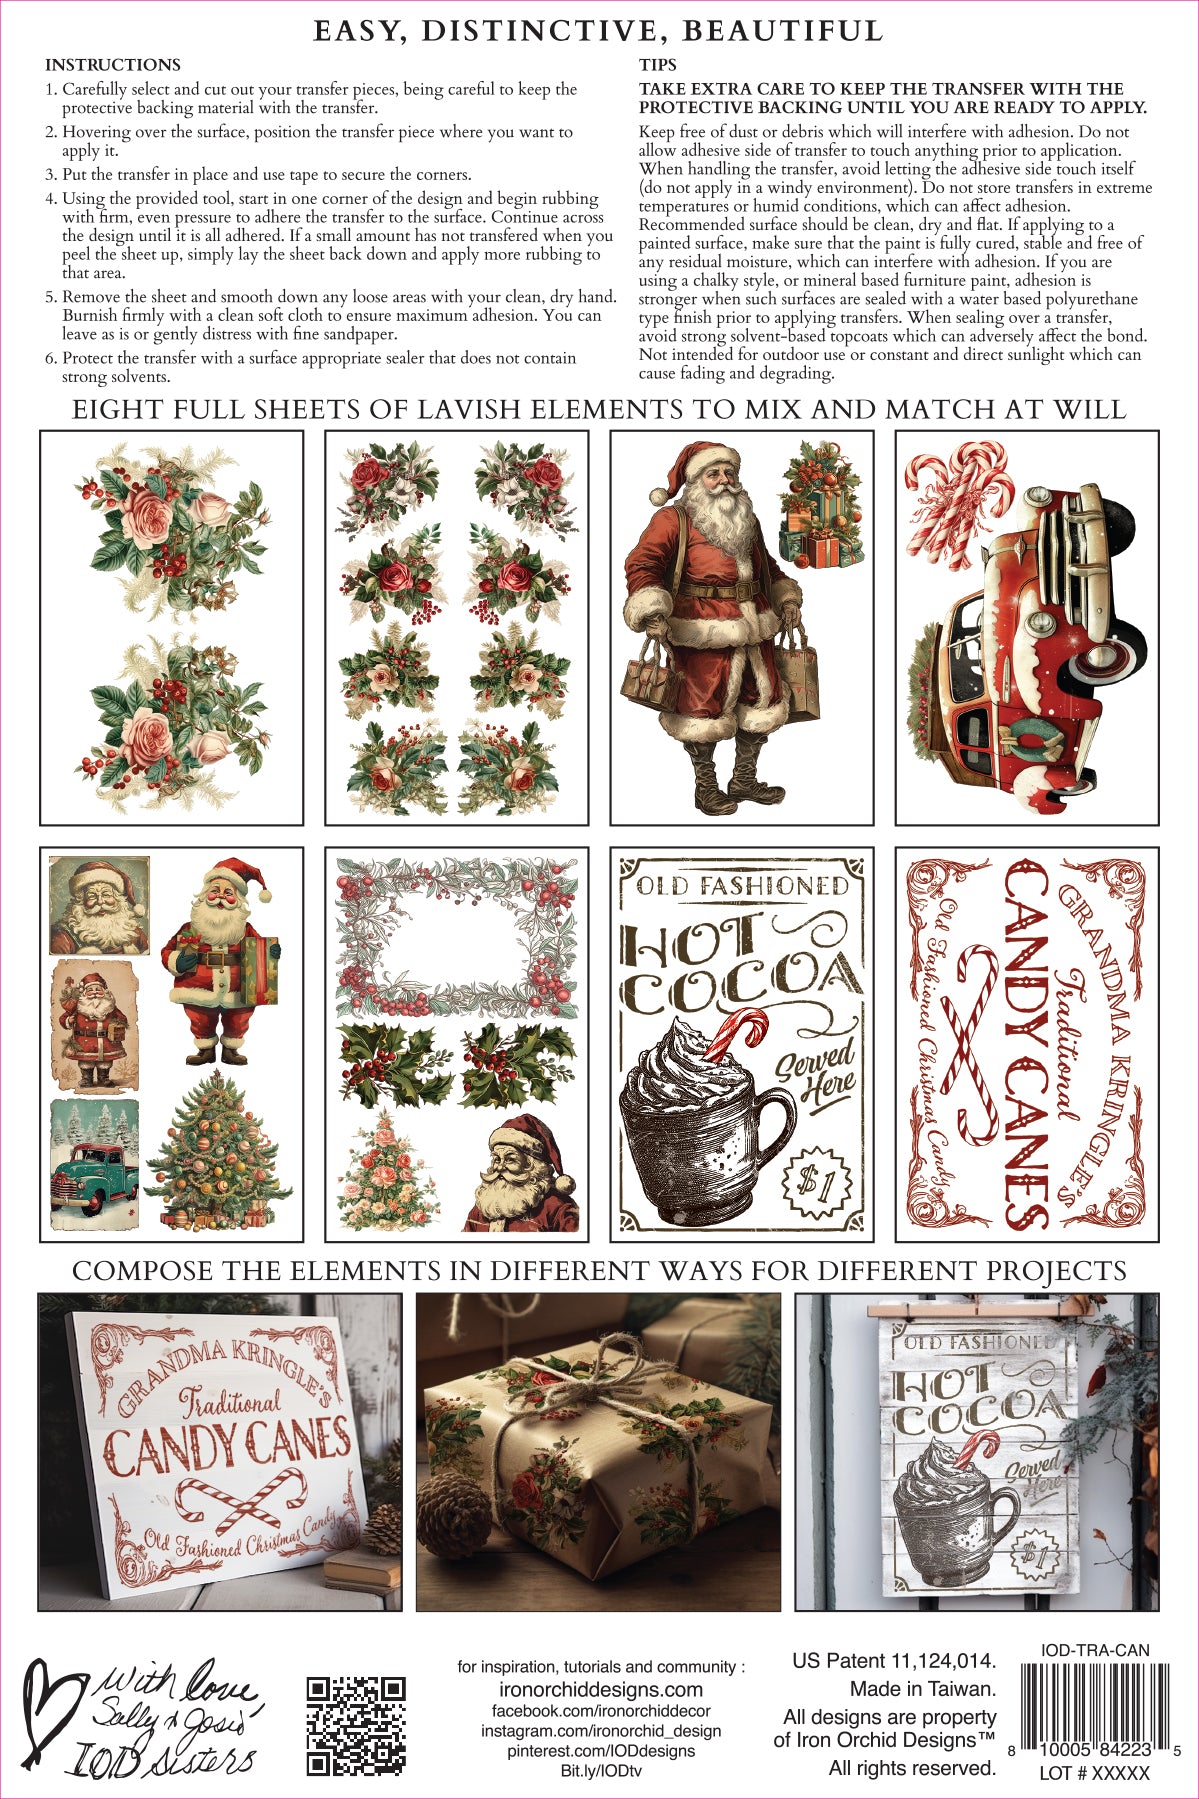 Iron Orchid Designs Candy Cane Cottage | IOD Transfer